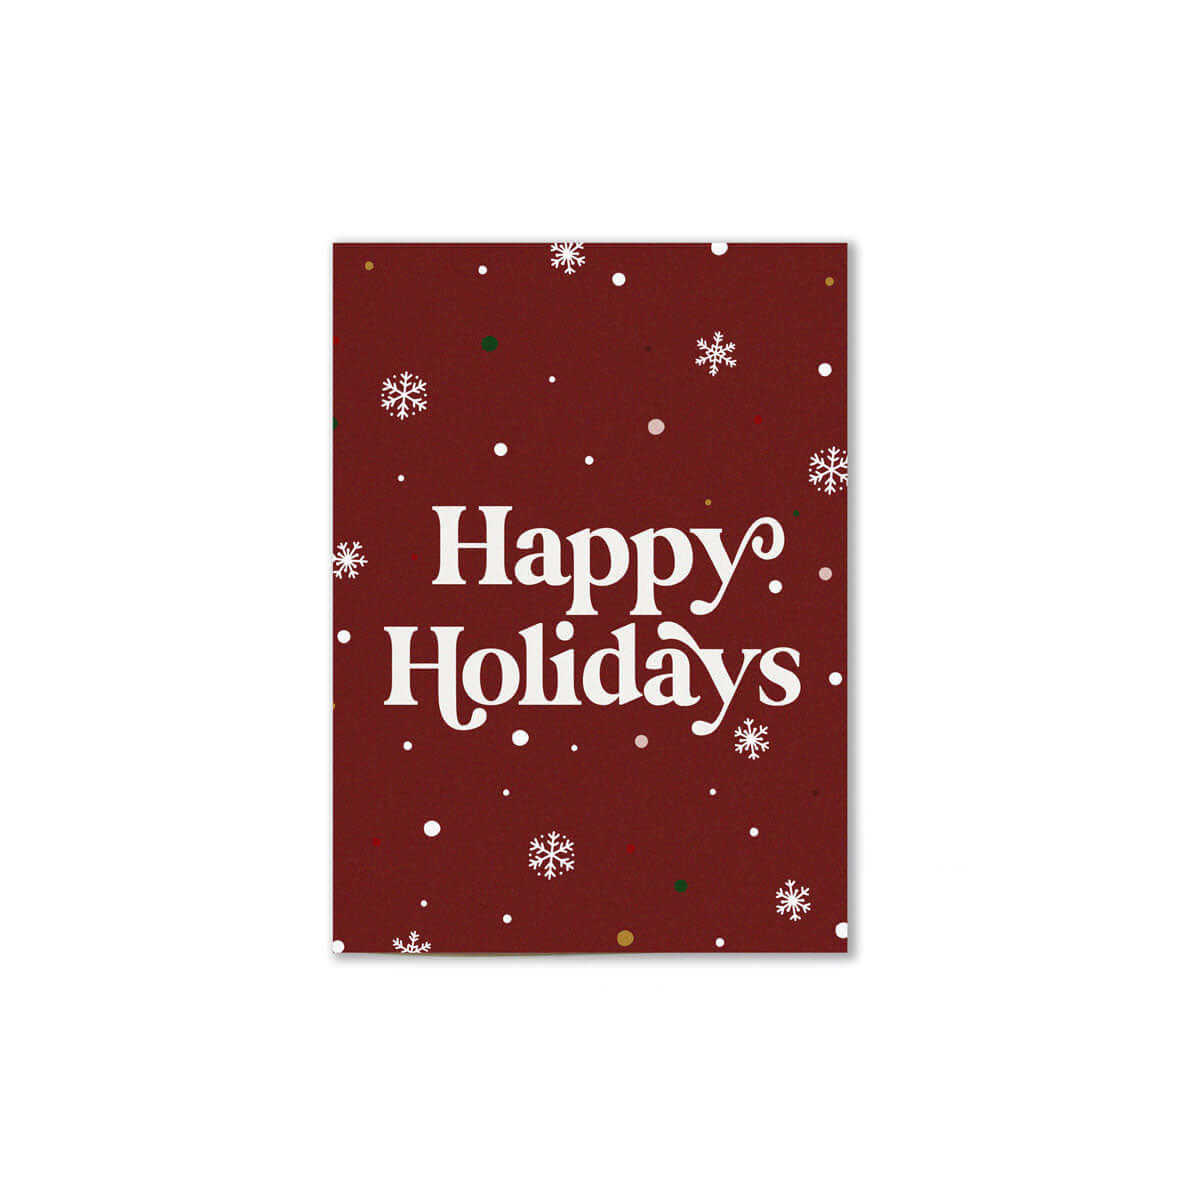 maroon happy holidays card that reads "Happy holidays" in white bold text with falling white snowflakes illustrations.